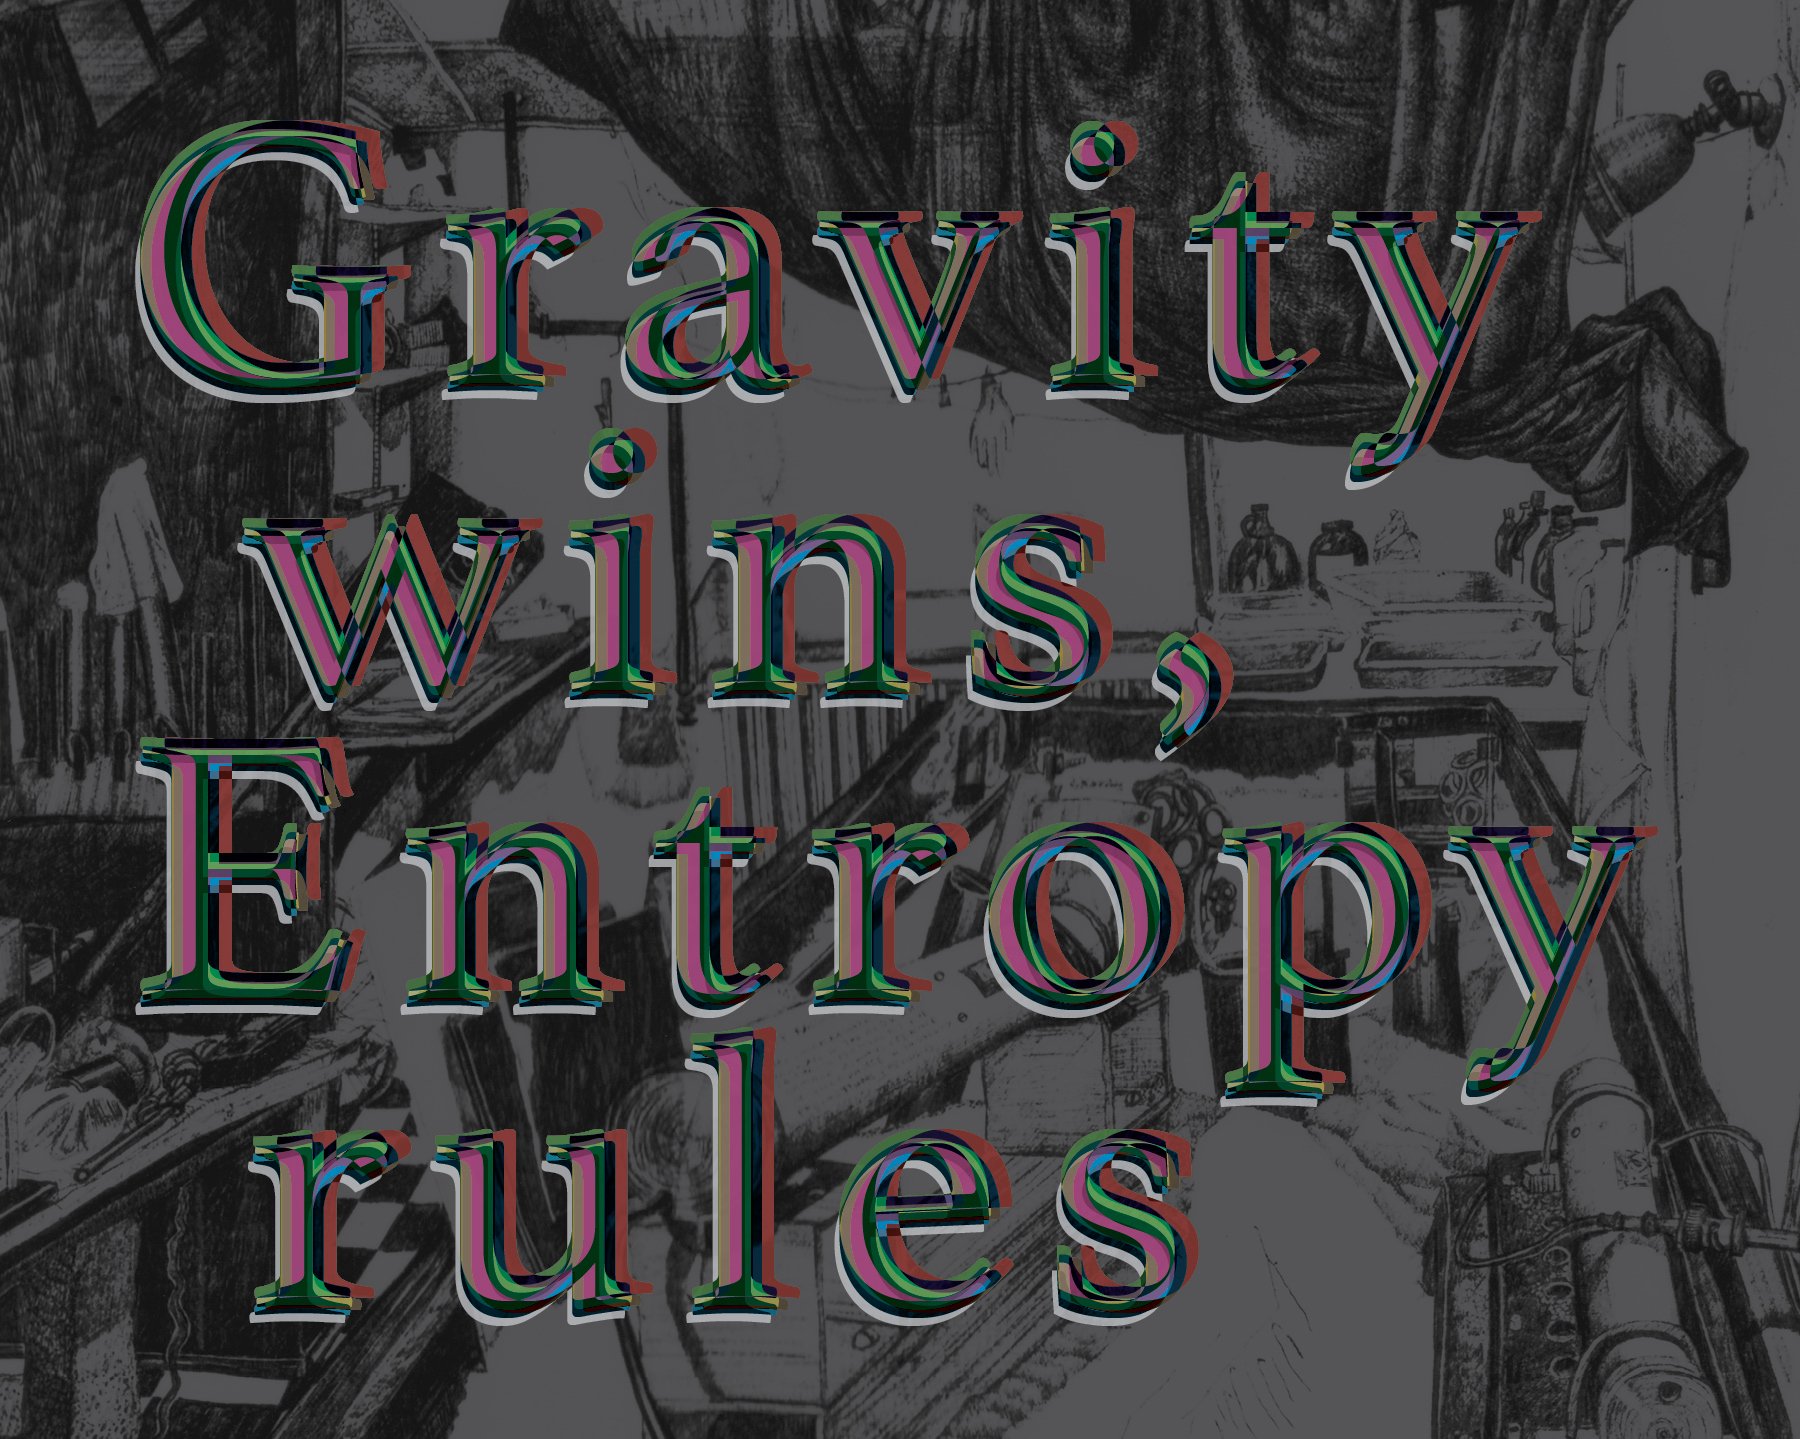 A dark grey illustration featuring text which reads "Gravity Wins, Entropy Rules"